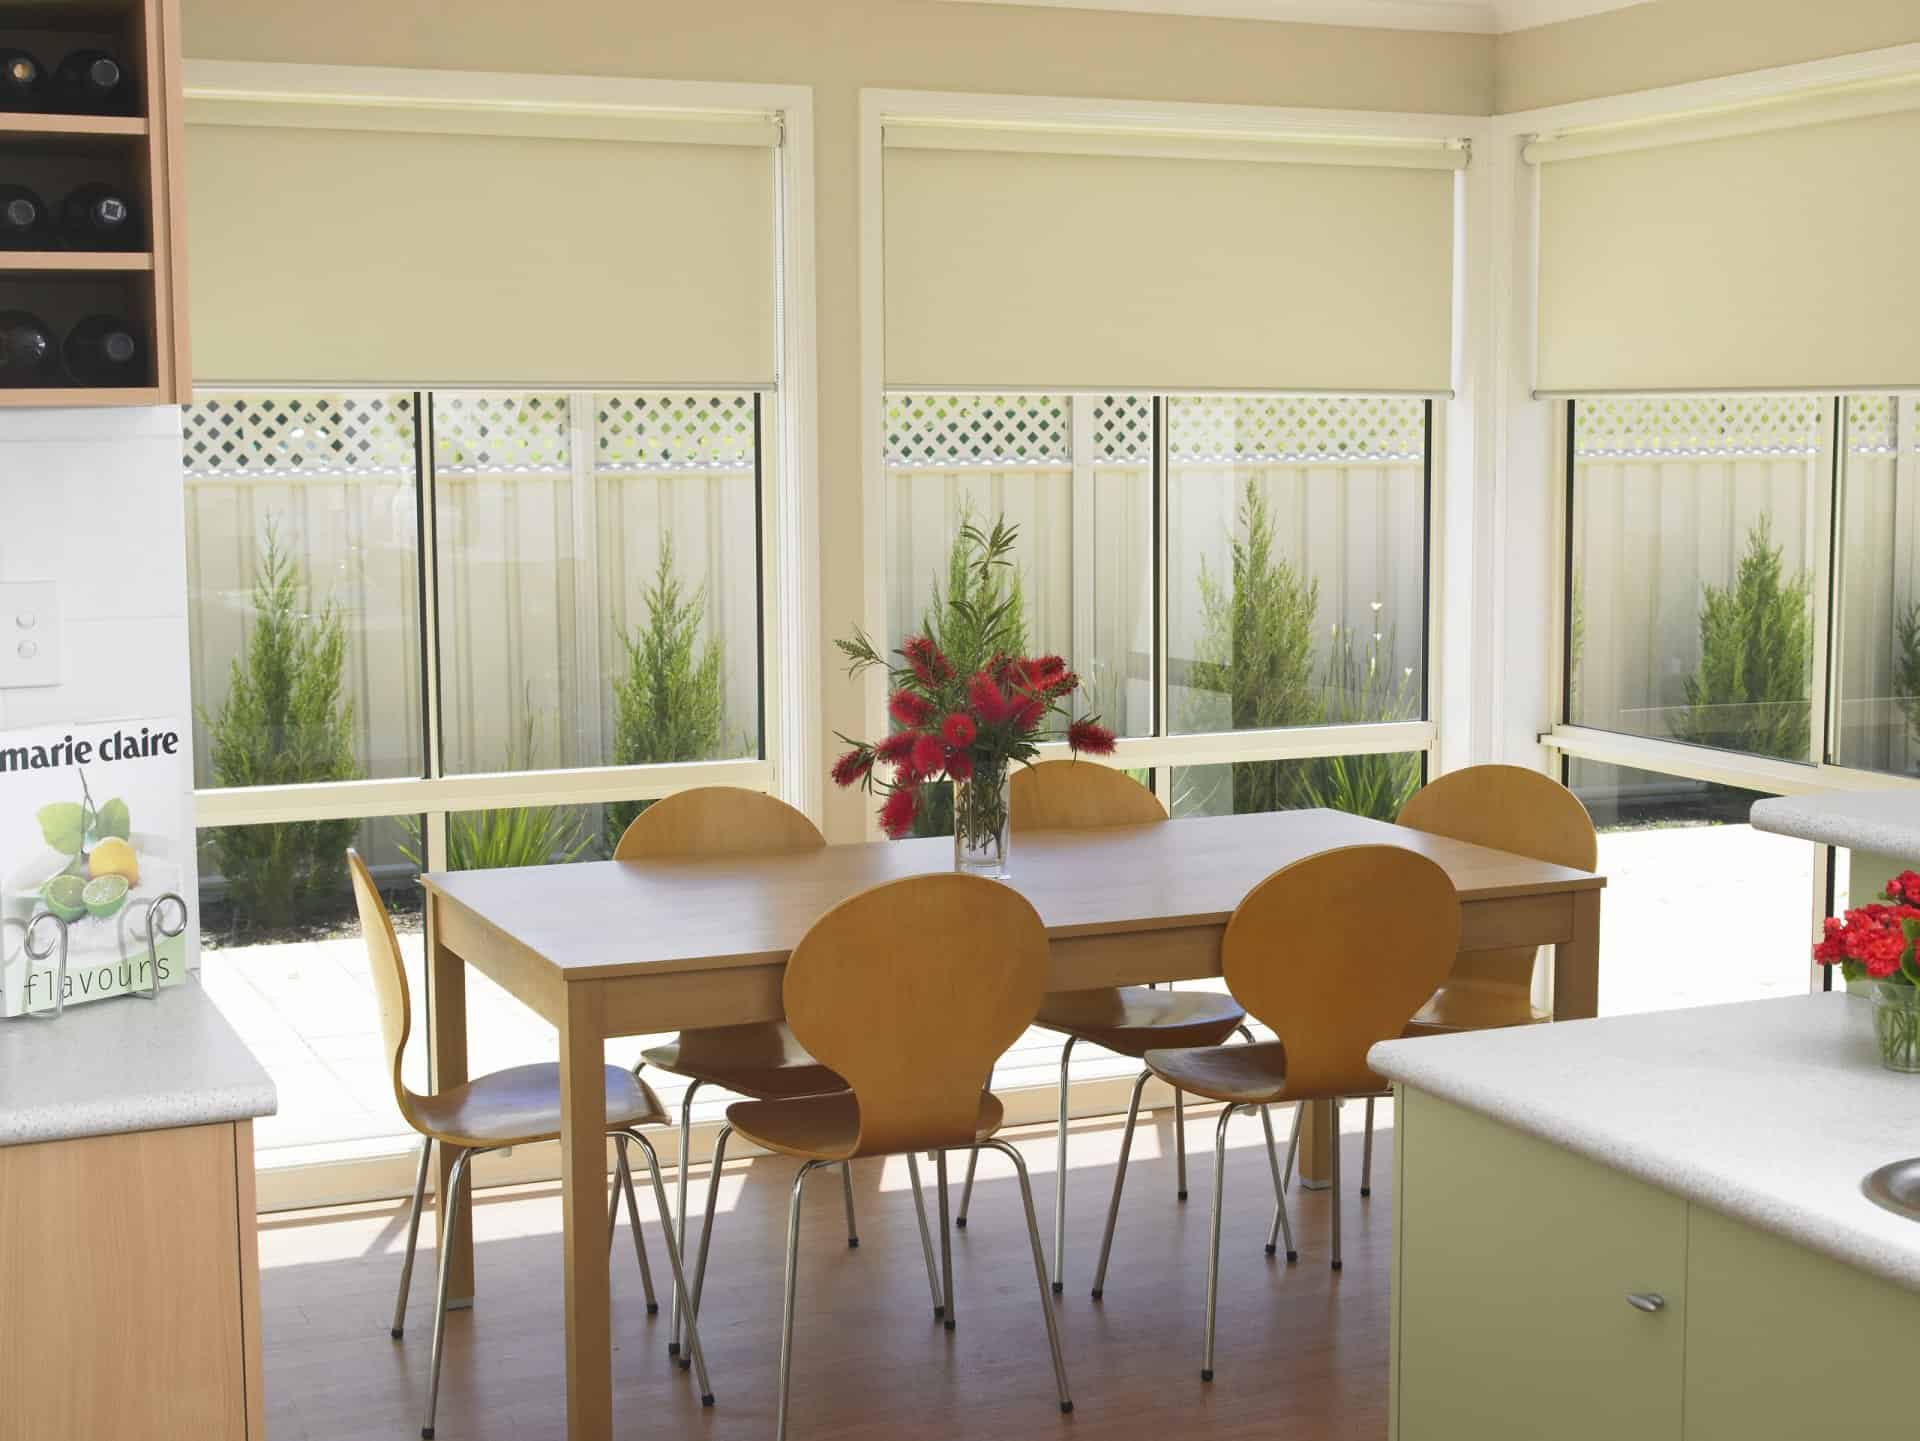 Stanbond SA - Indoor Blinds Adelaide - Image of roll up blinds in dining room